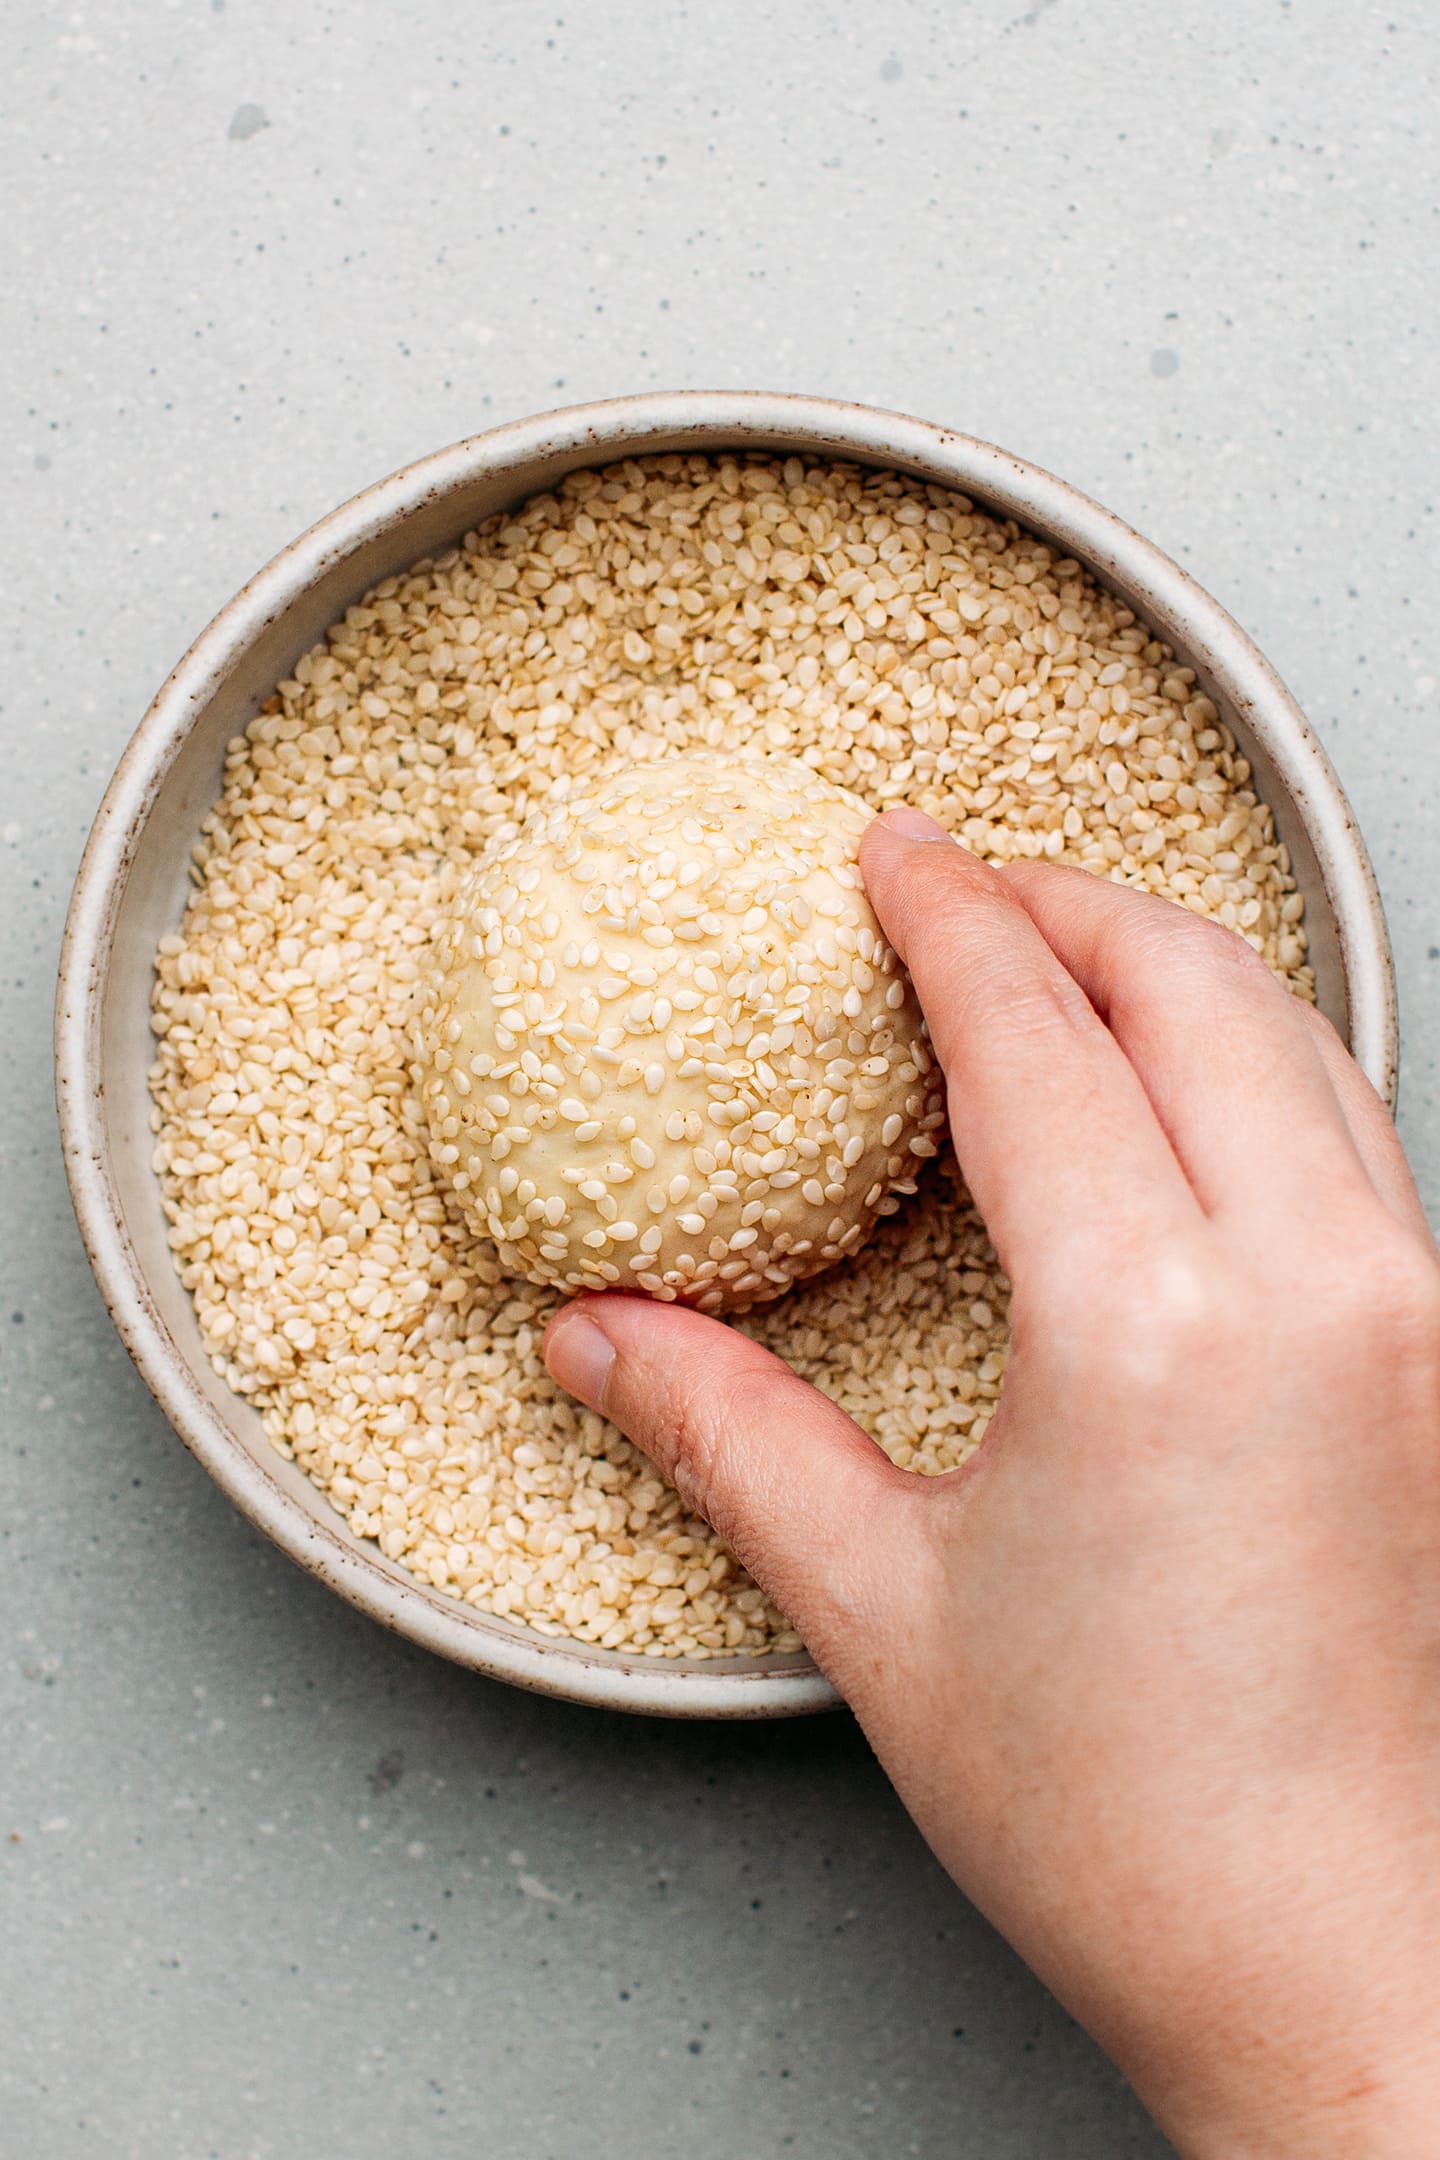 Coating a ball of dough with sesame seeds.